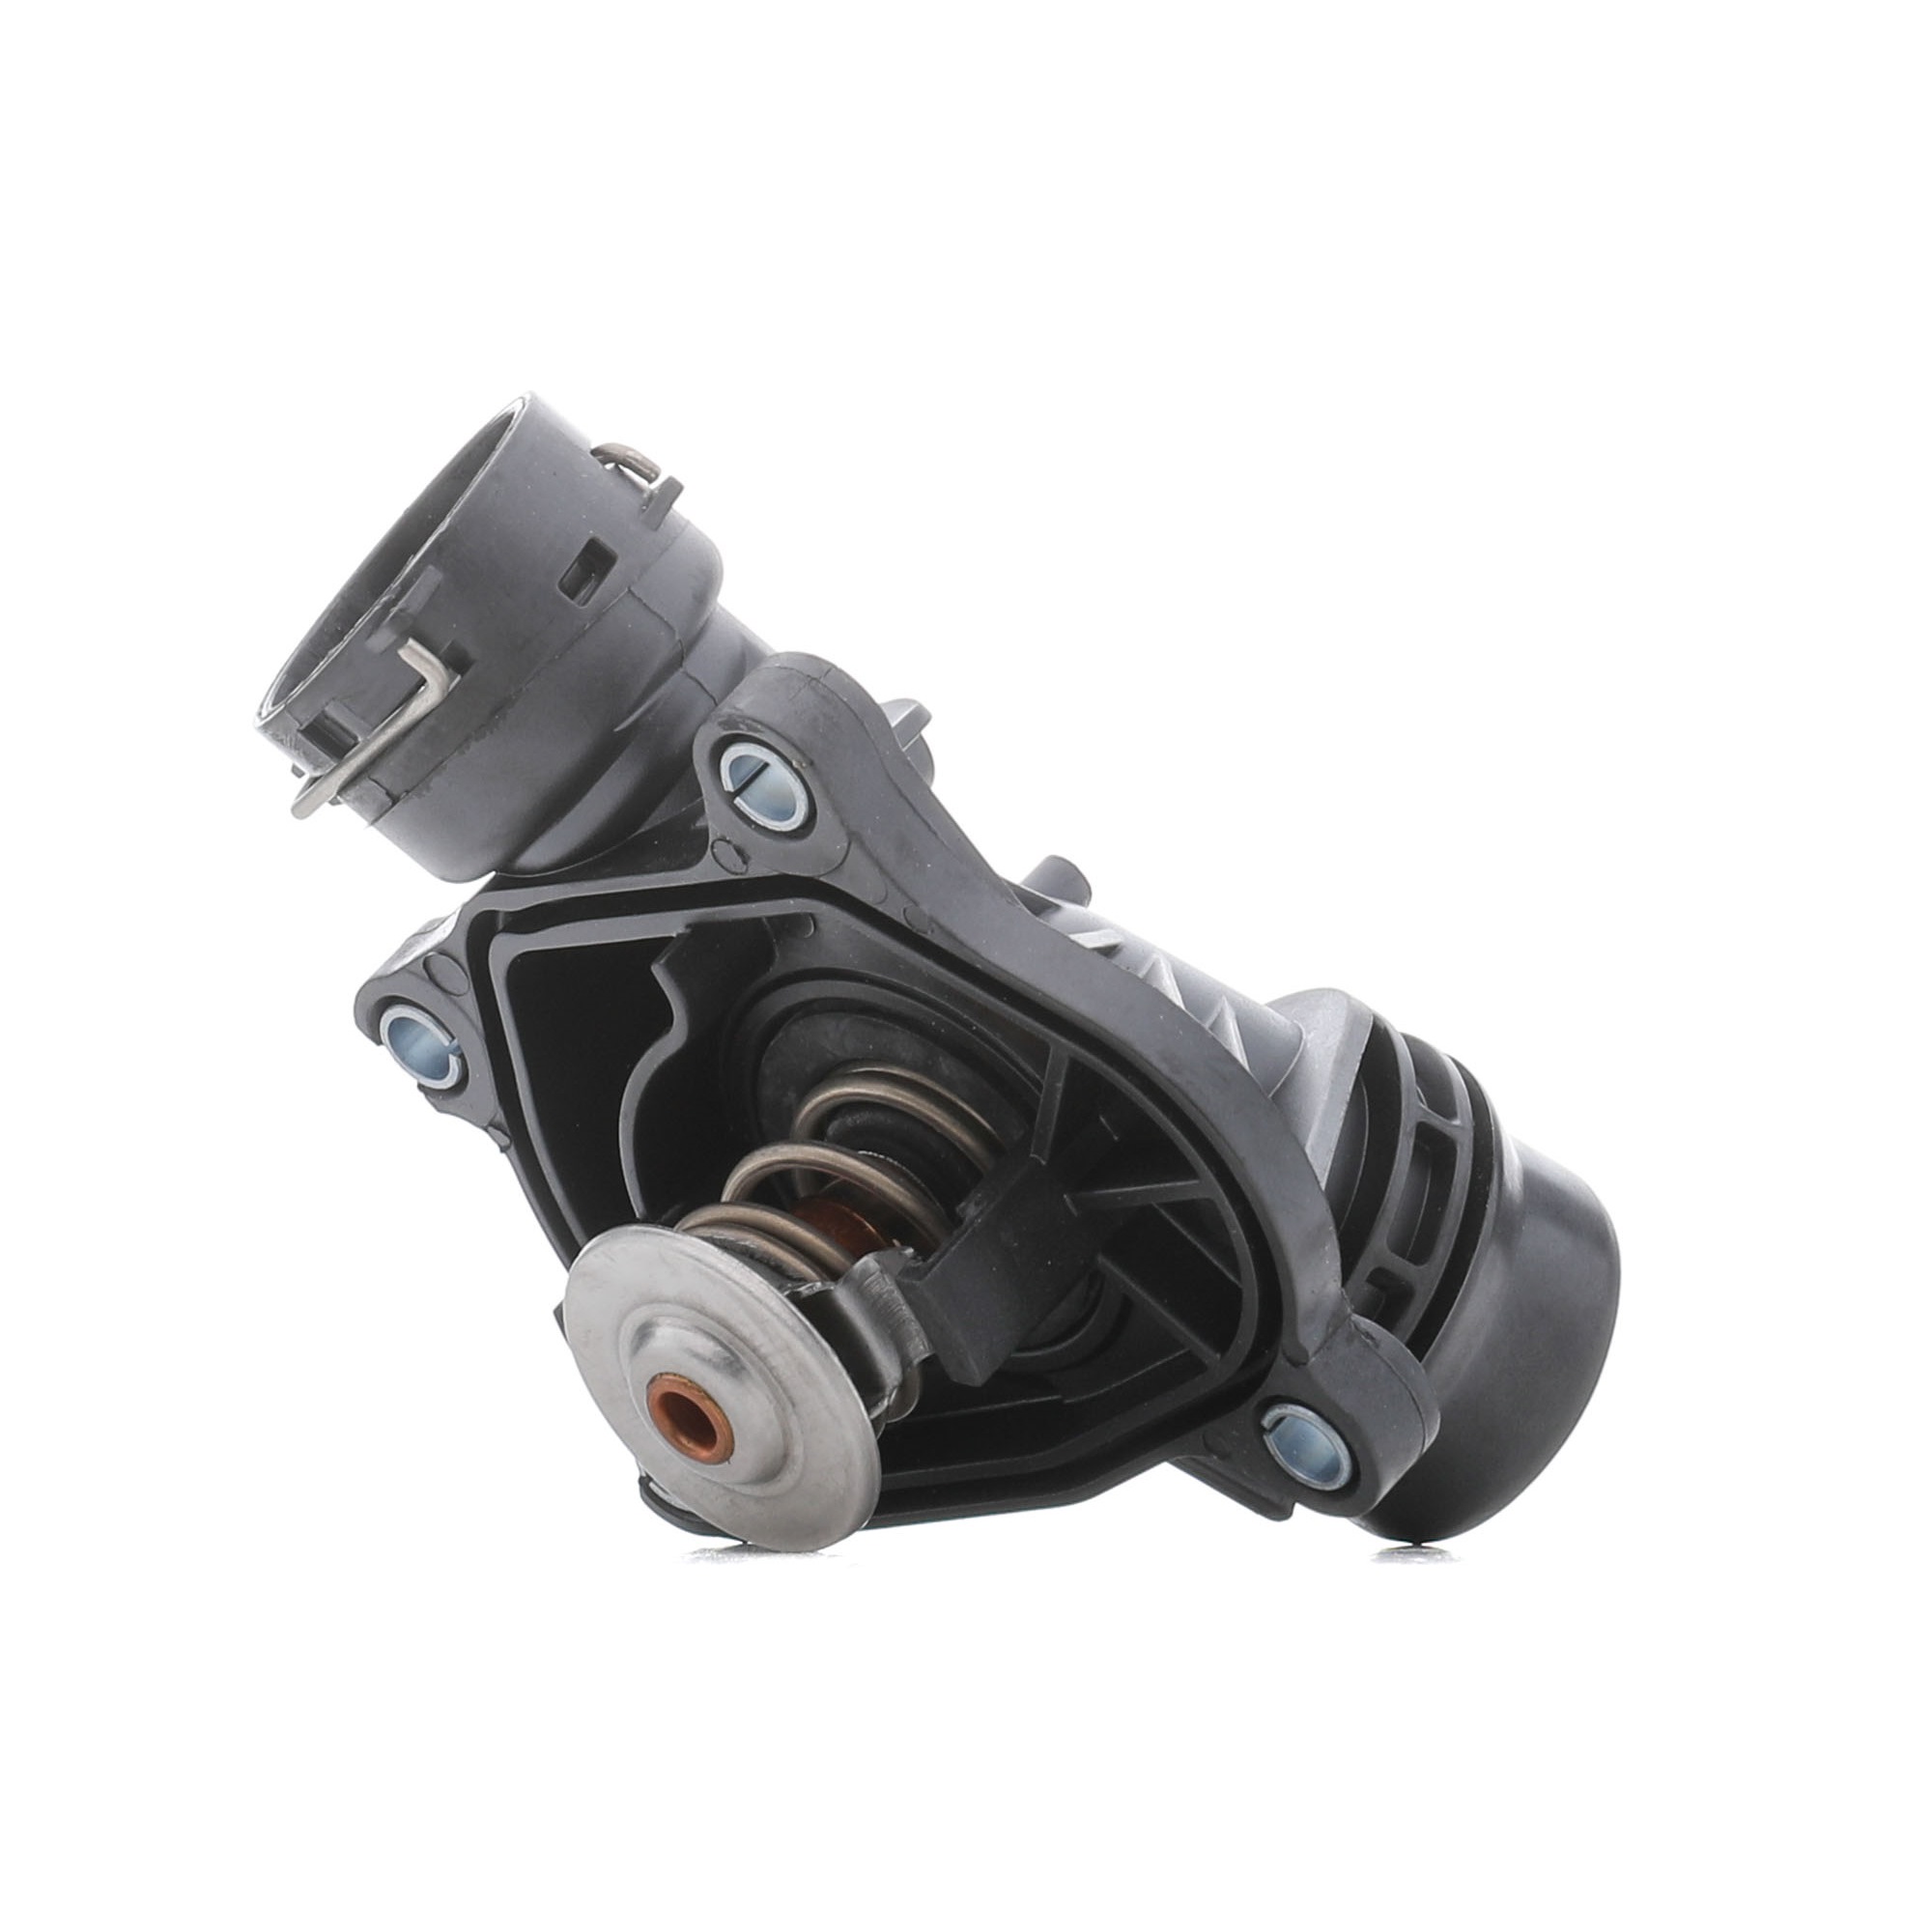 VALEO 820249 Engine thermostat Opening Temperature: 88°C, with gaskets/seals, with housing